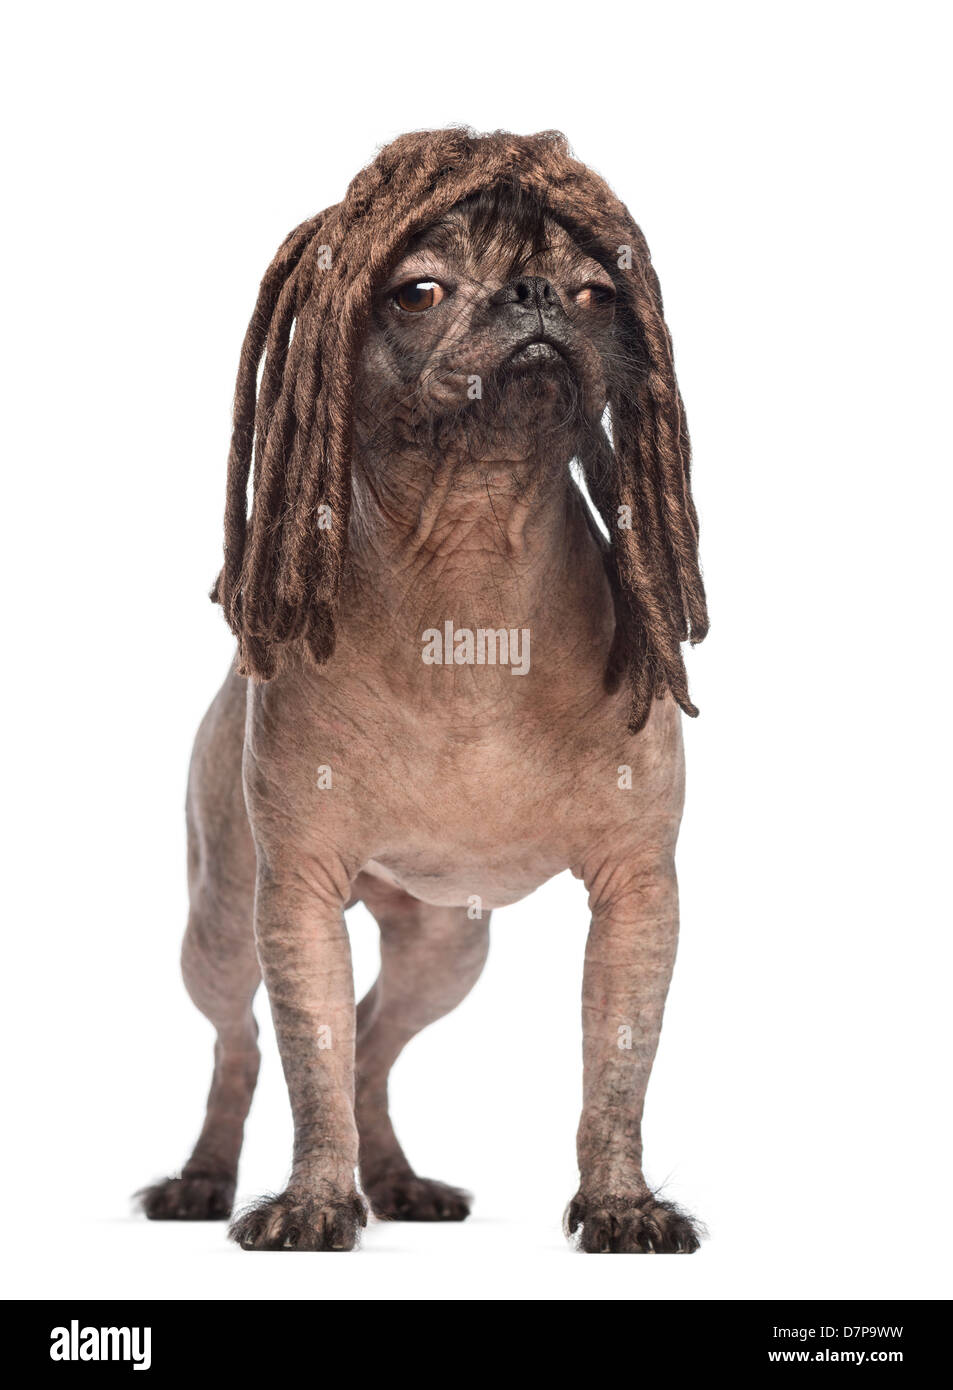 Hairless Mixed breed, a cross between a French Bulldog and Chinese Crested Dog, wearing dreadlock wig against white background Stock Photo